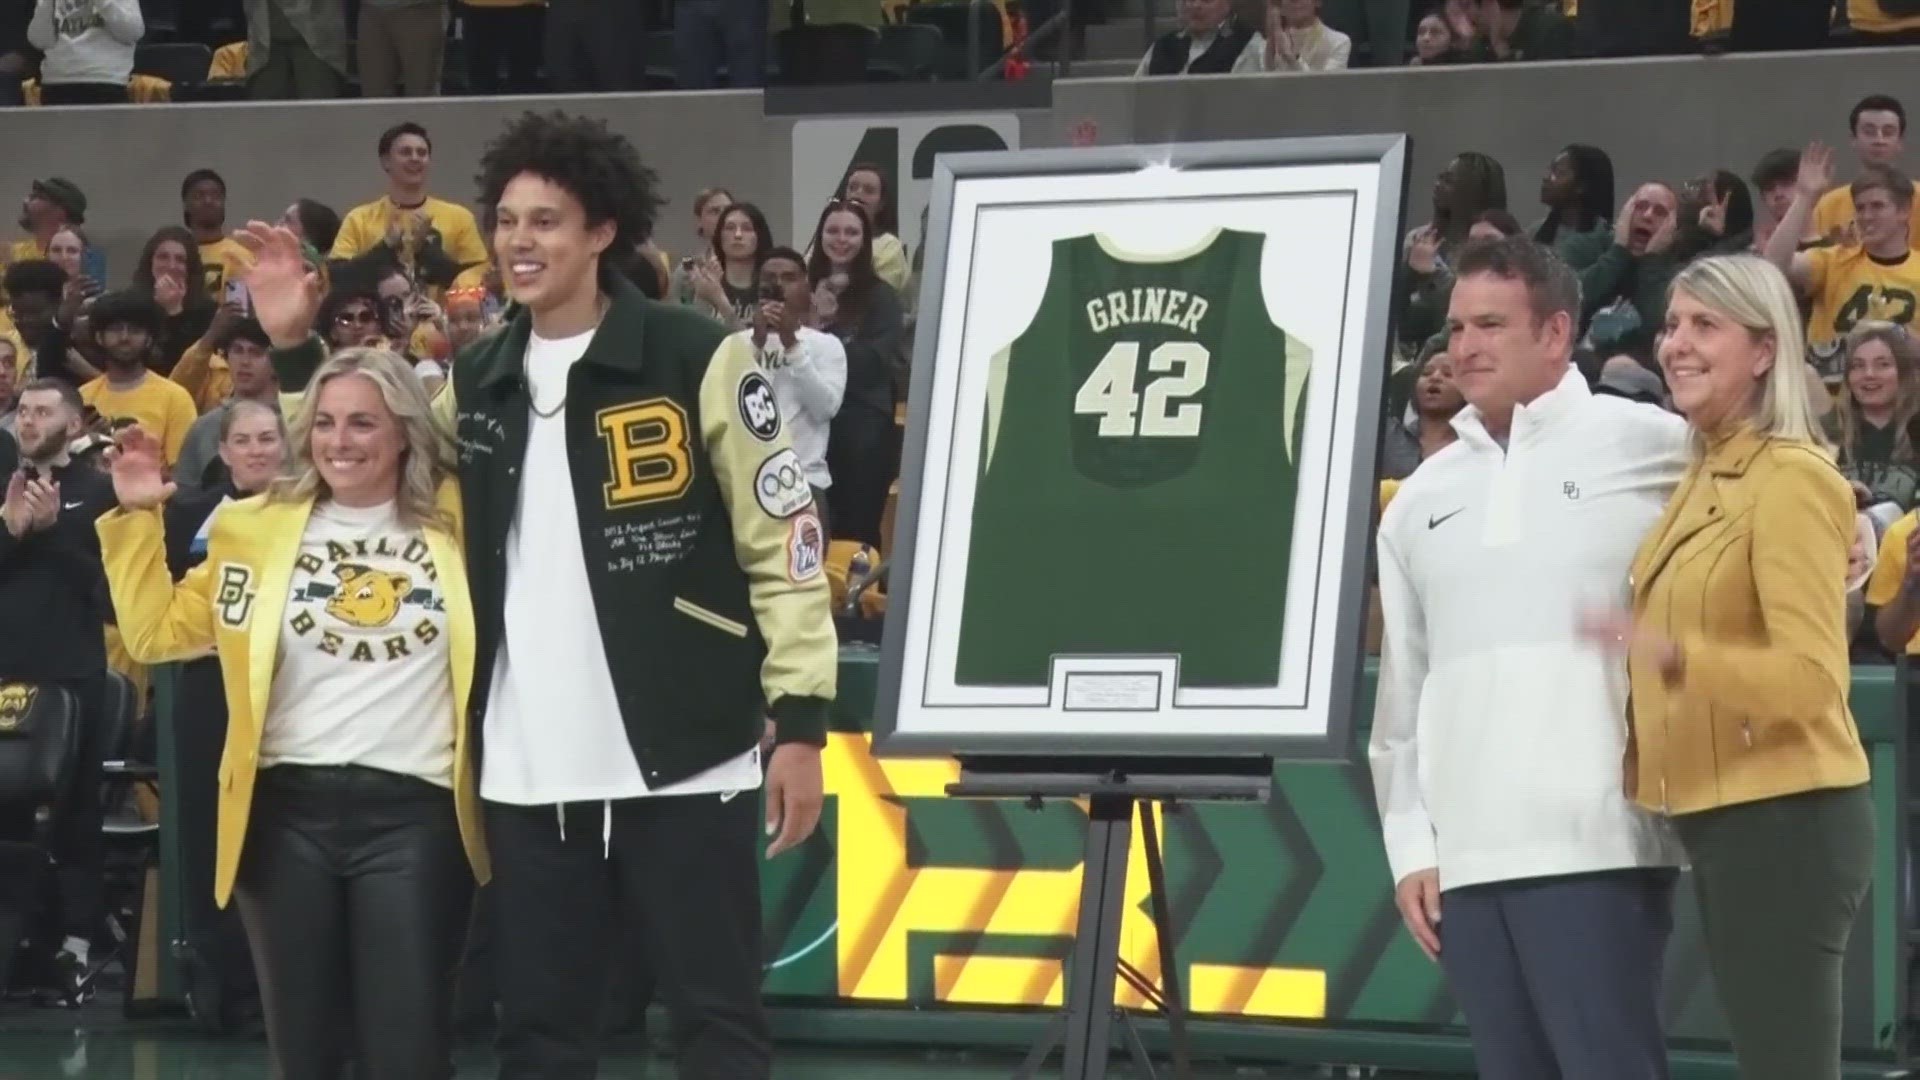 The ceremony took place ahead of the Baylor vs Texas Tech women's basketball game, on Sunday, Feb. 18.